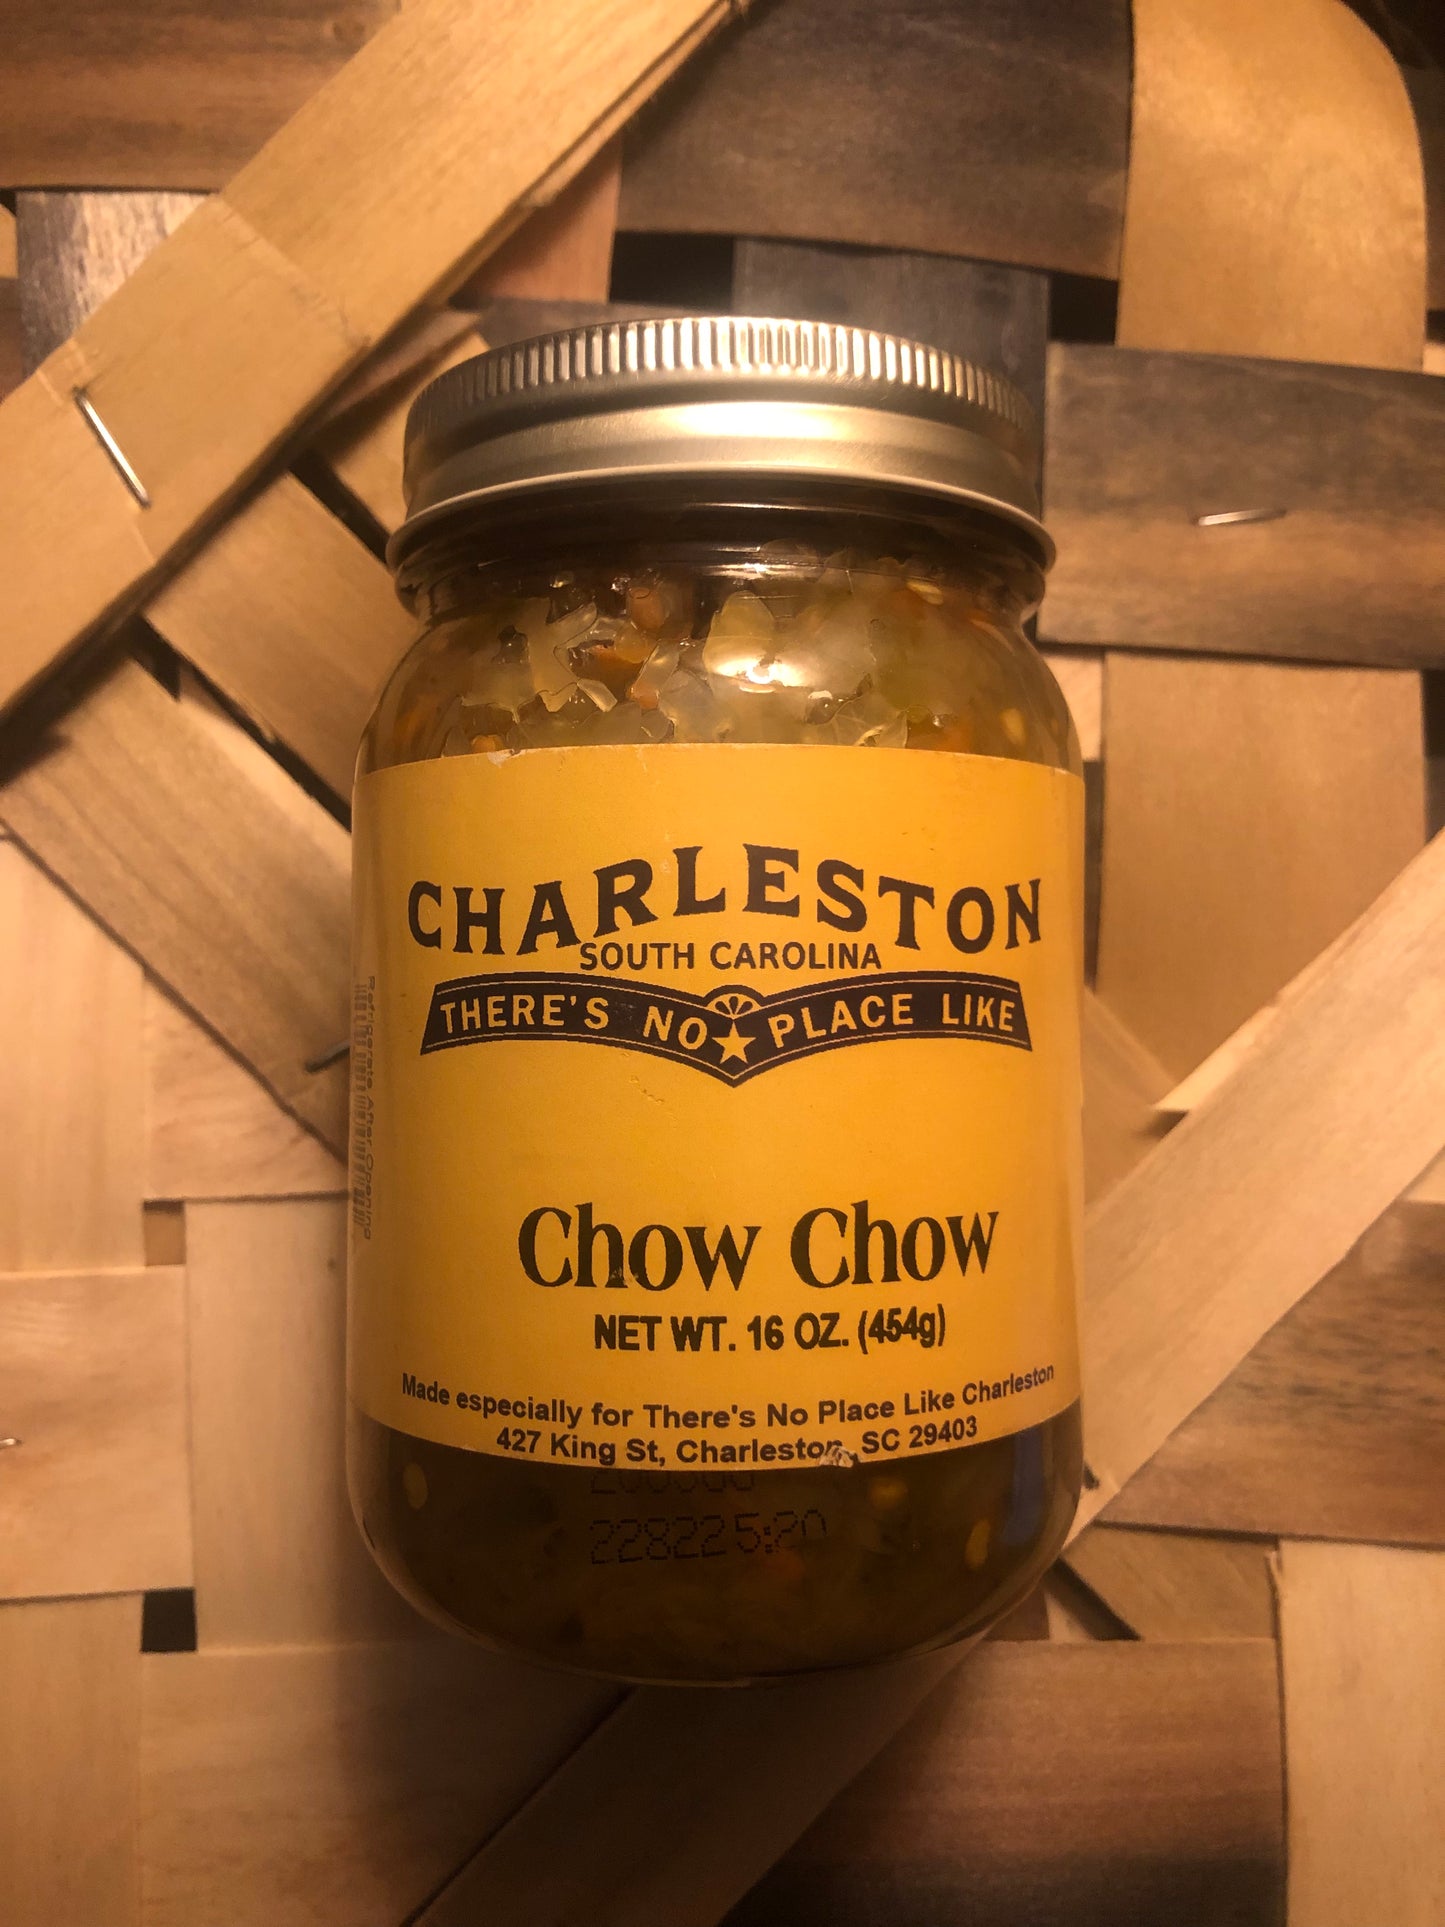 Chow-Chow / A Southern Tradition